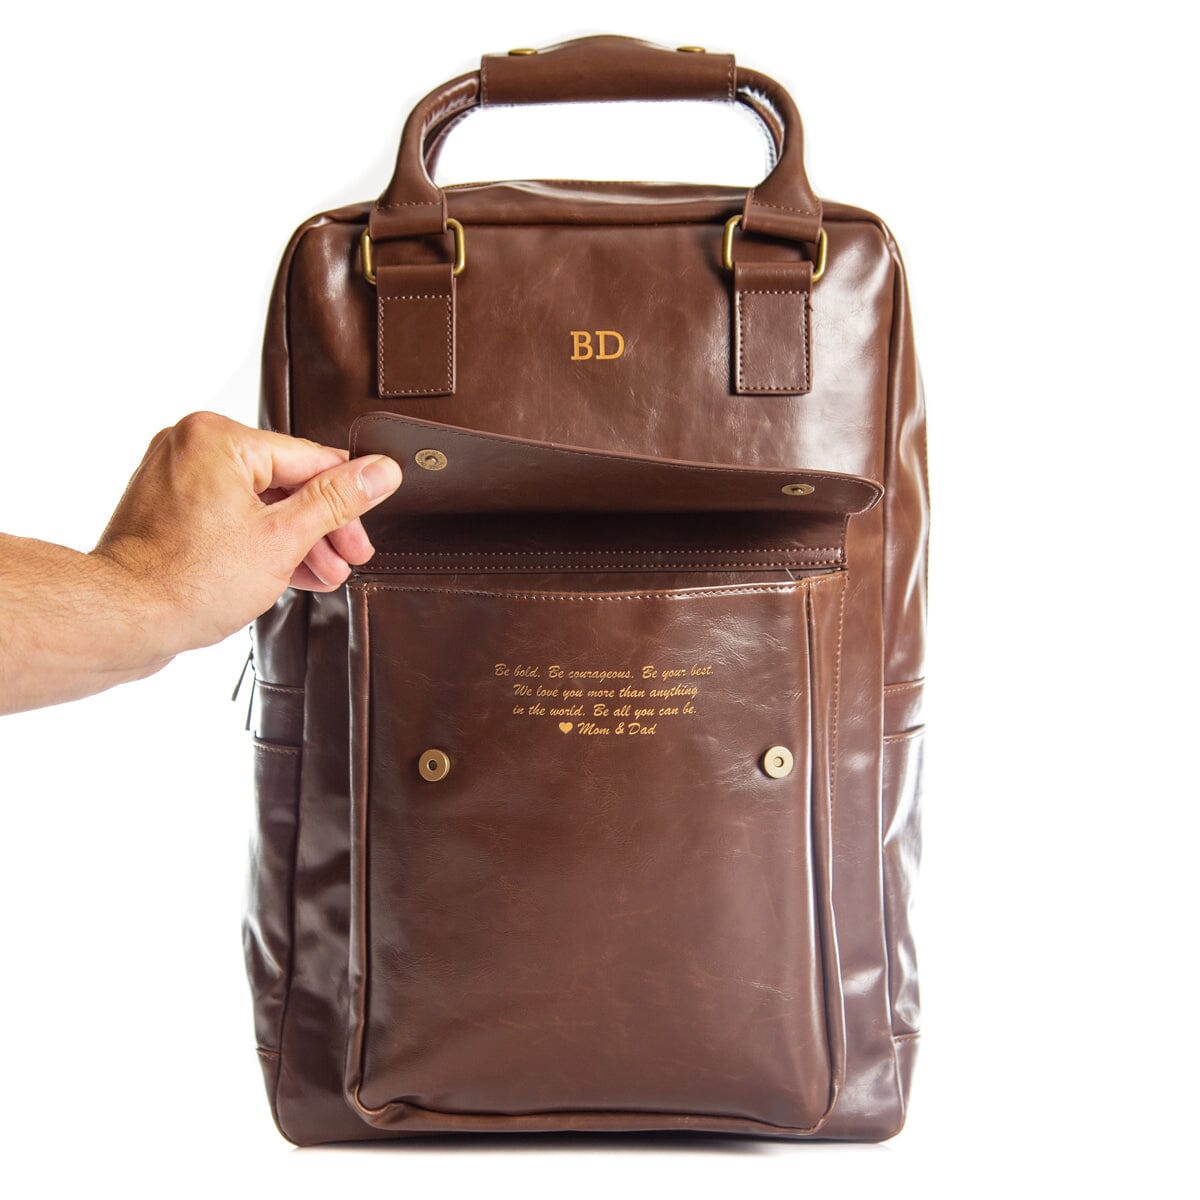 Laptop Backpack - Executive Swanky Badger Front Only 